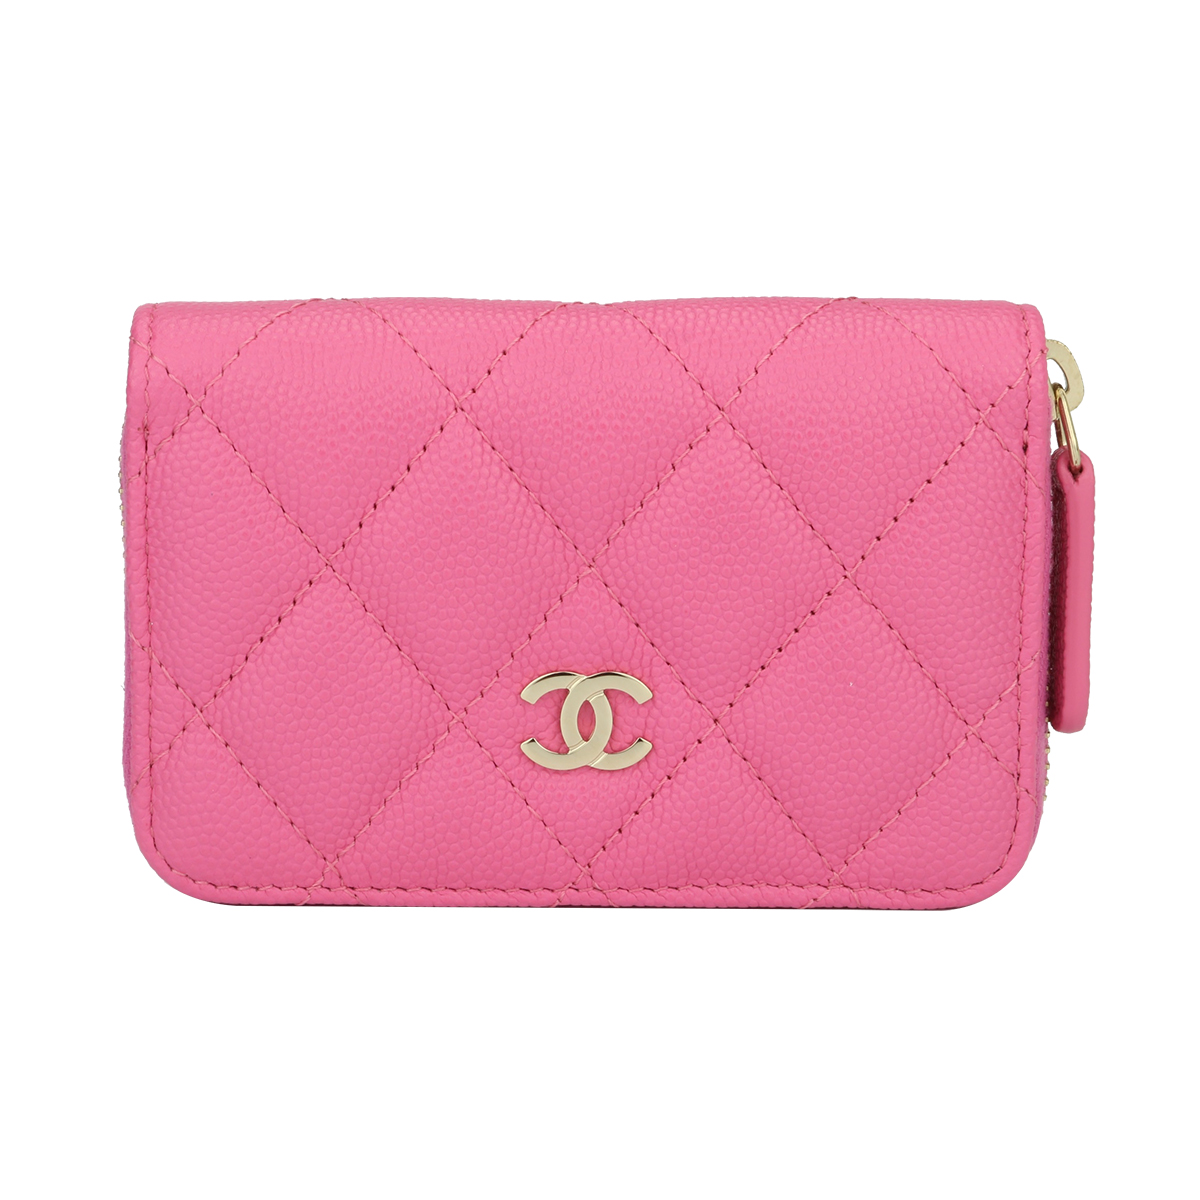 Chanel Classic Zip Around Coin Purse – ARMCANDY BAG CO